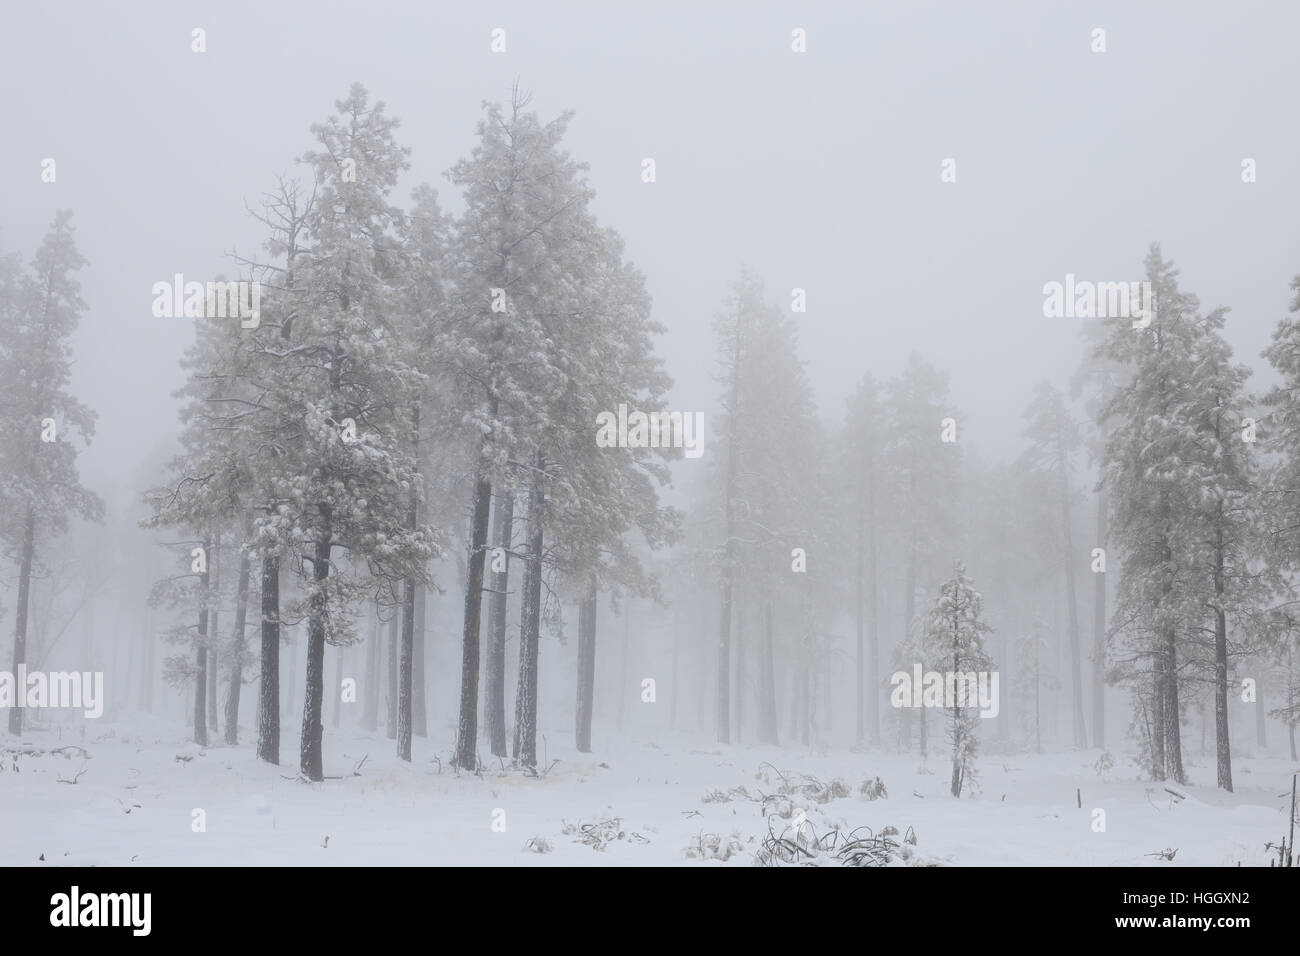 Snowy winter forest scene with fog and mist Stock Photo